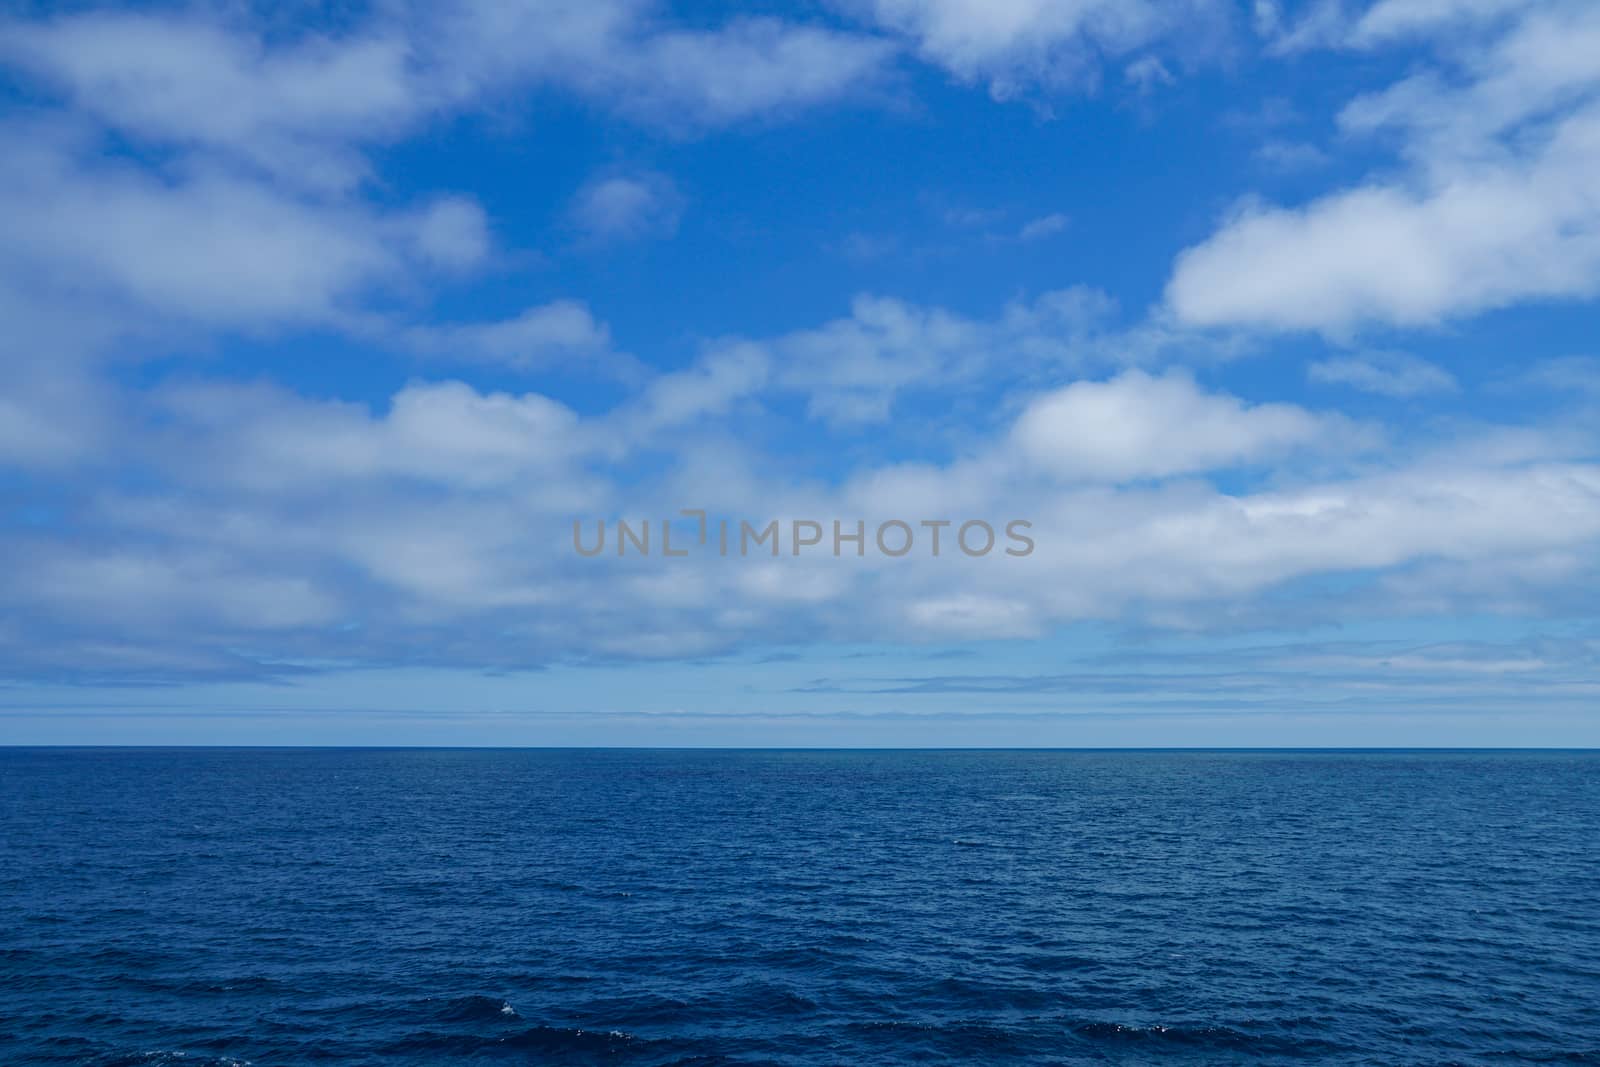 The blue water of the Atlantic Ocean with cloudy skies  by Jshanebutt